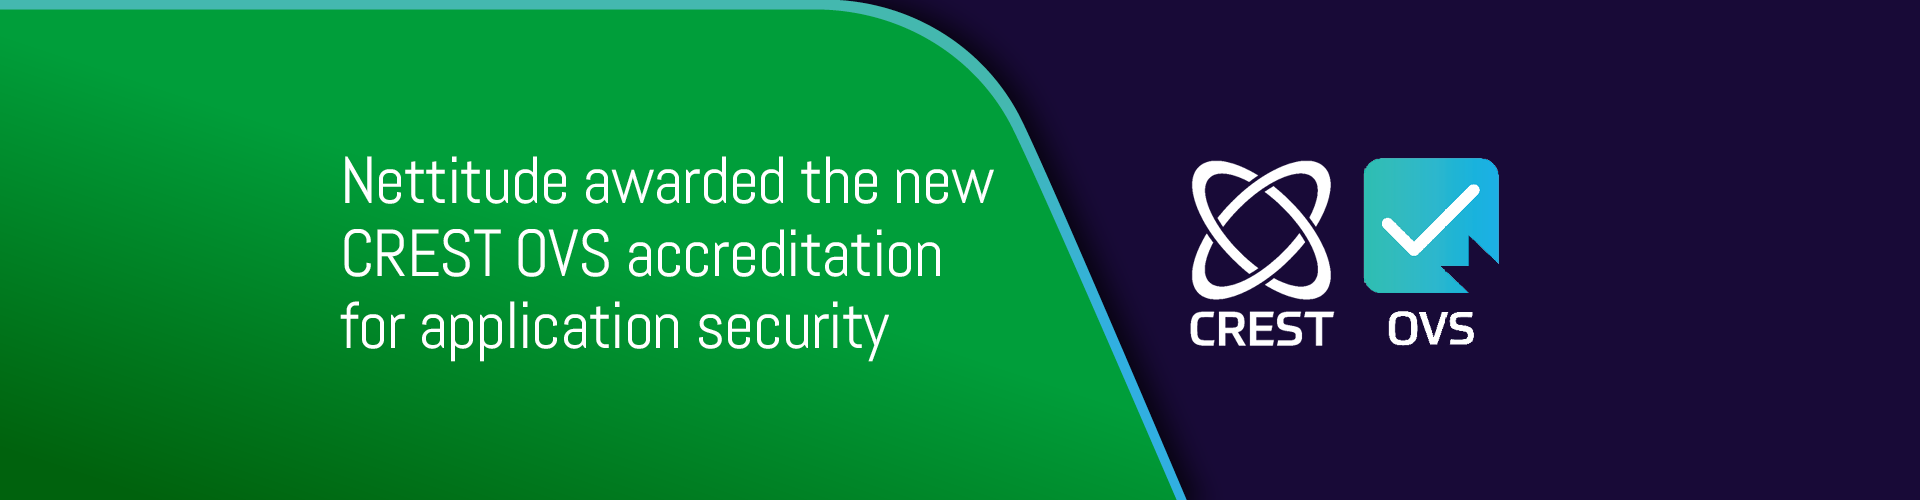 Nettitude among the first to be awarded CREST accreditation for application security